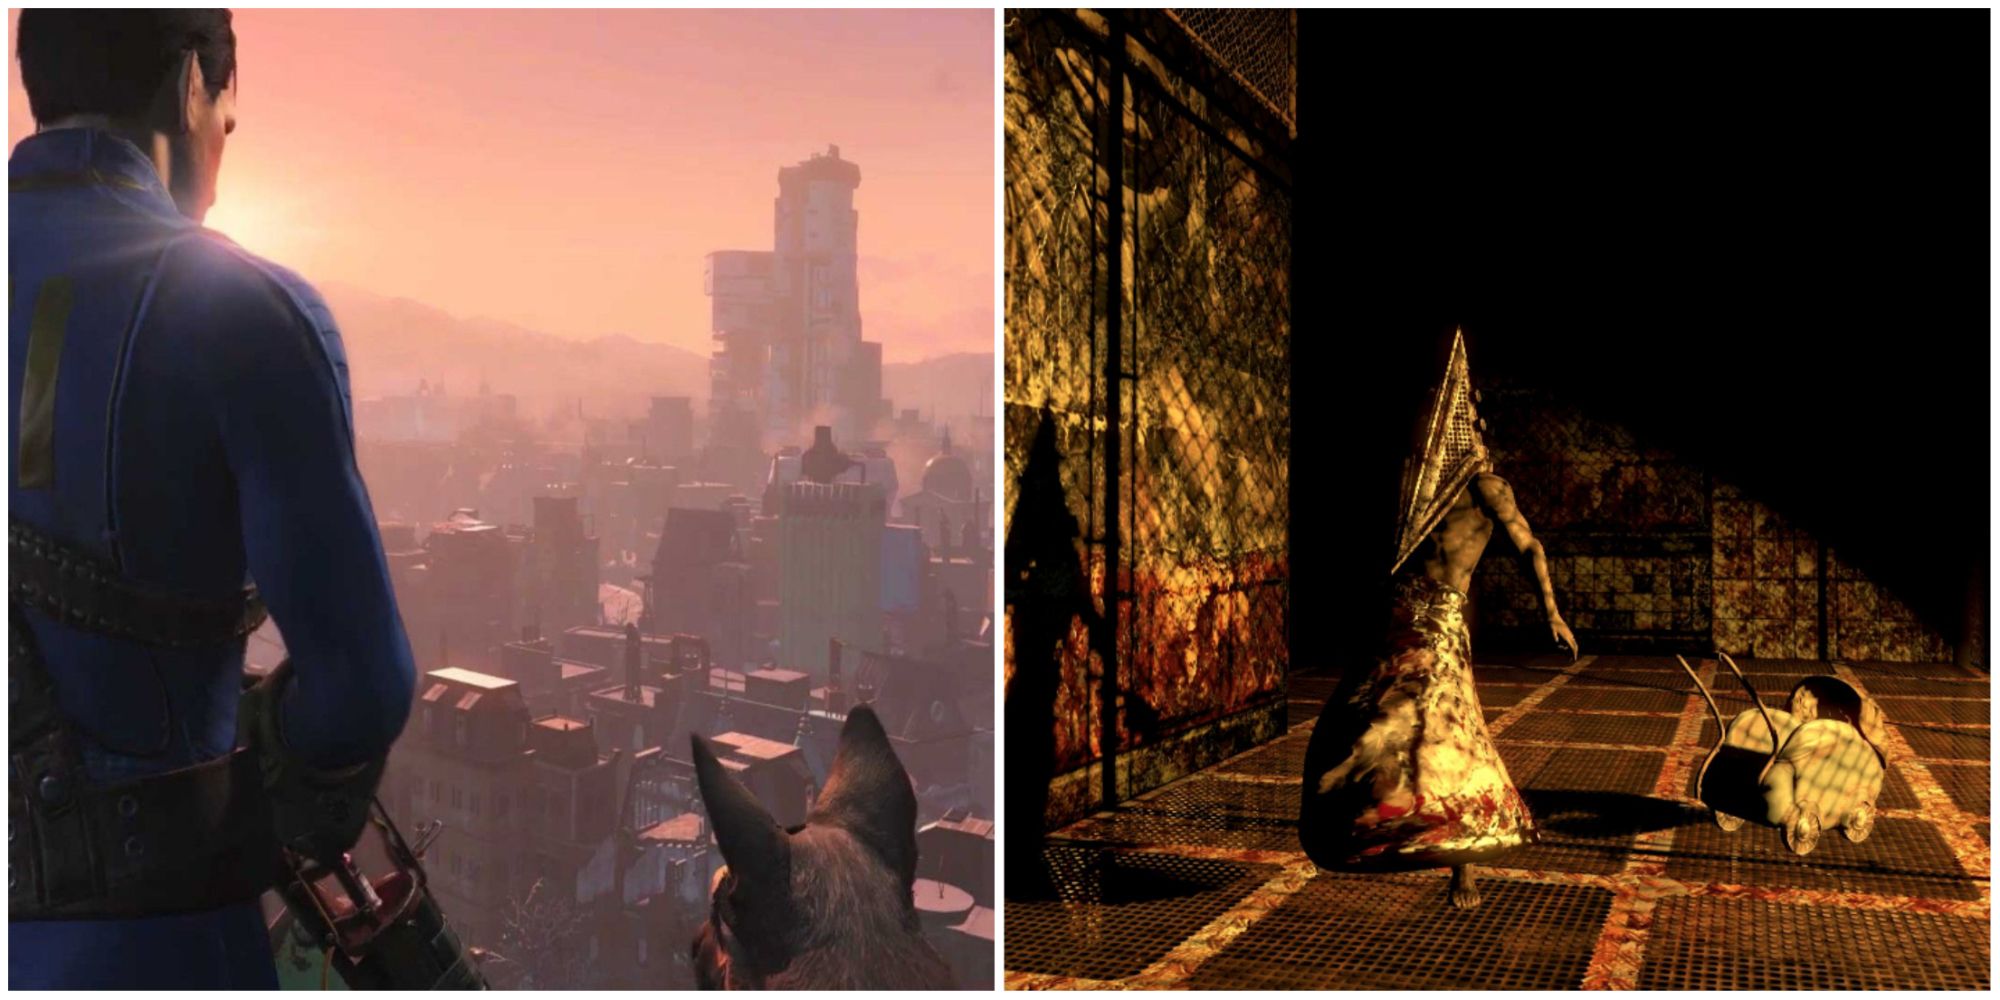 Fallout 4 VR Mods - collage of vault dweller and hid dog, and Pyramid Head from Silent Hill